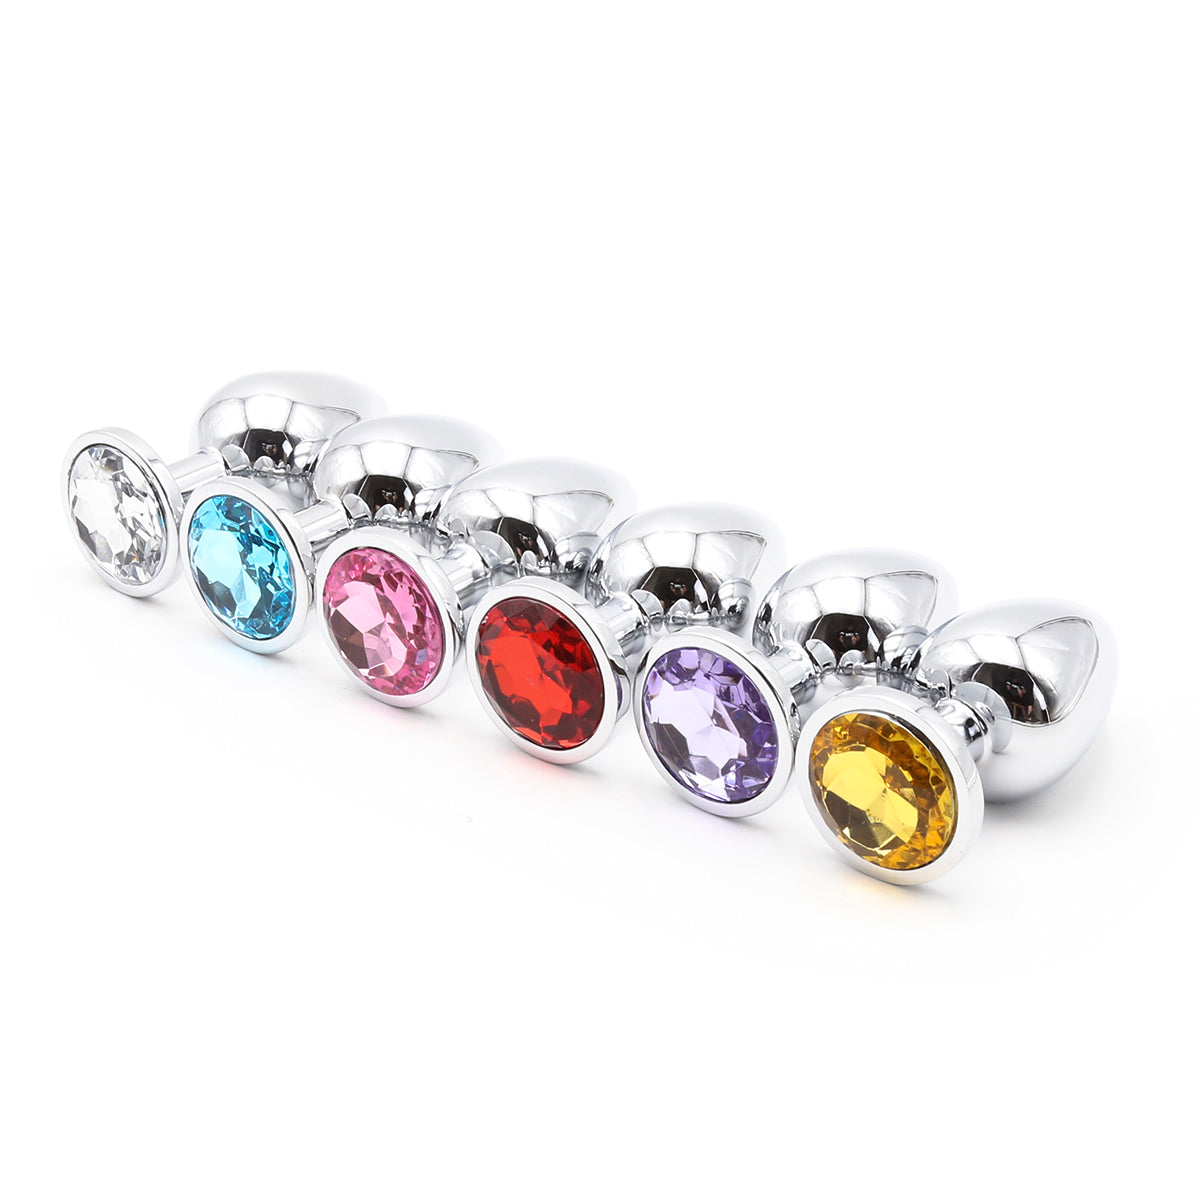 Medium Size Stainless Metal Butt Plug(Six Colors Available)